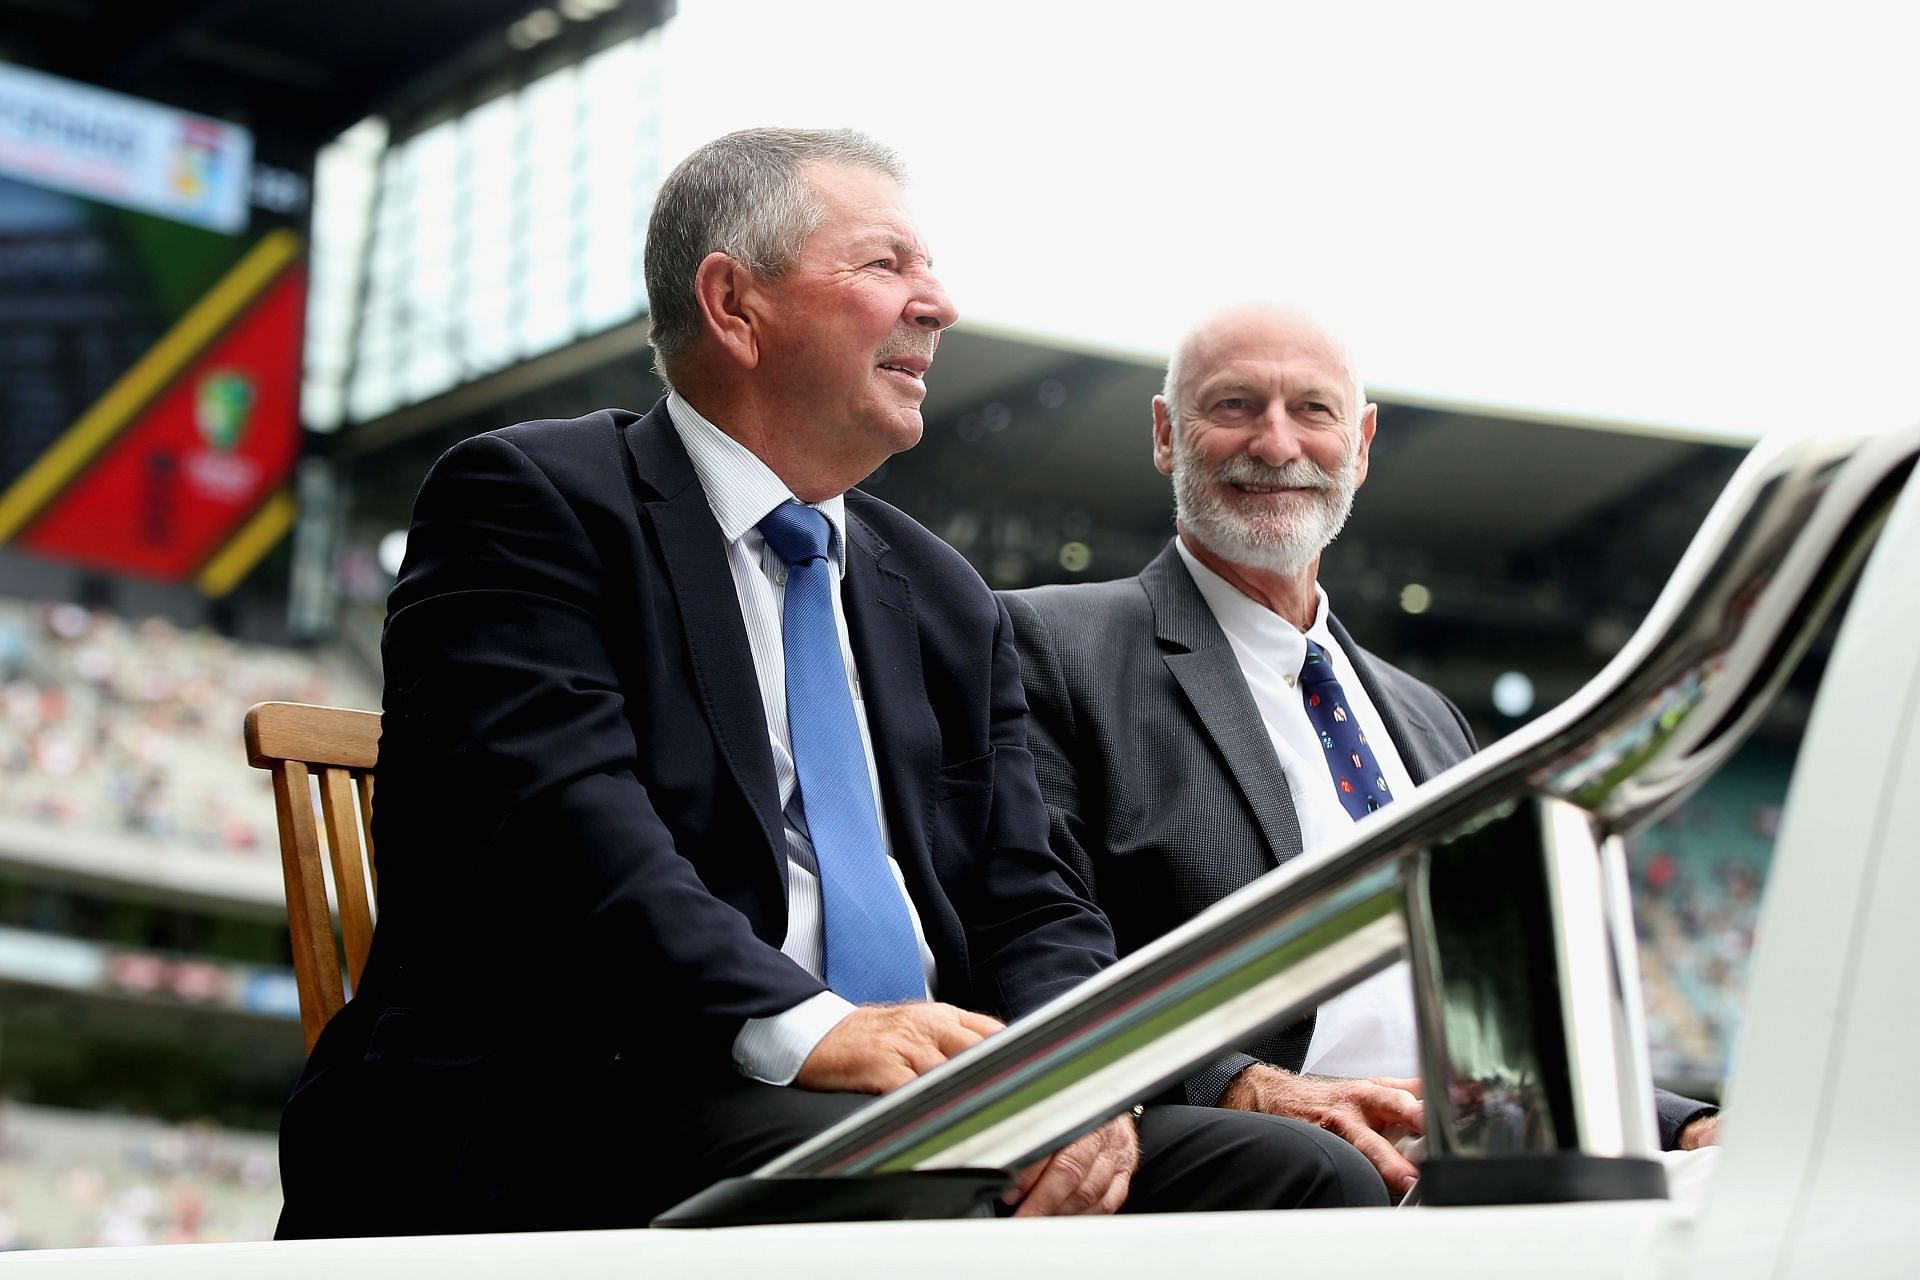 Rod Marsh and Dennis Lillee. (Credits: Getty)